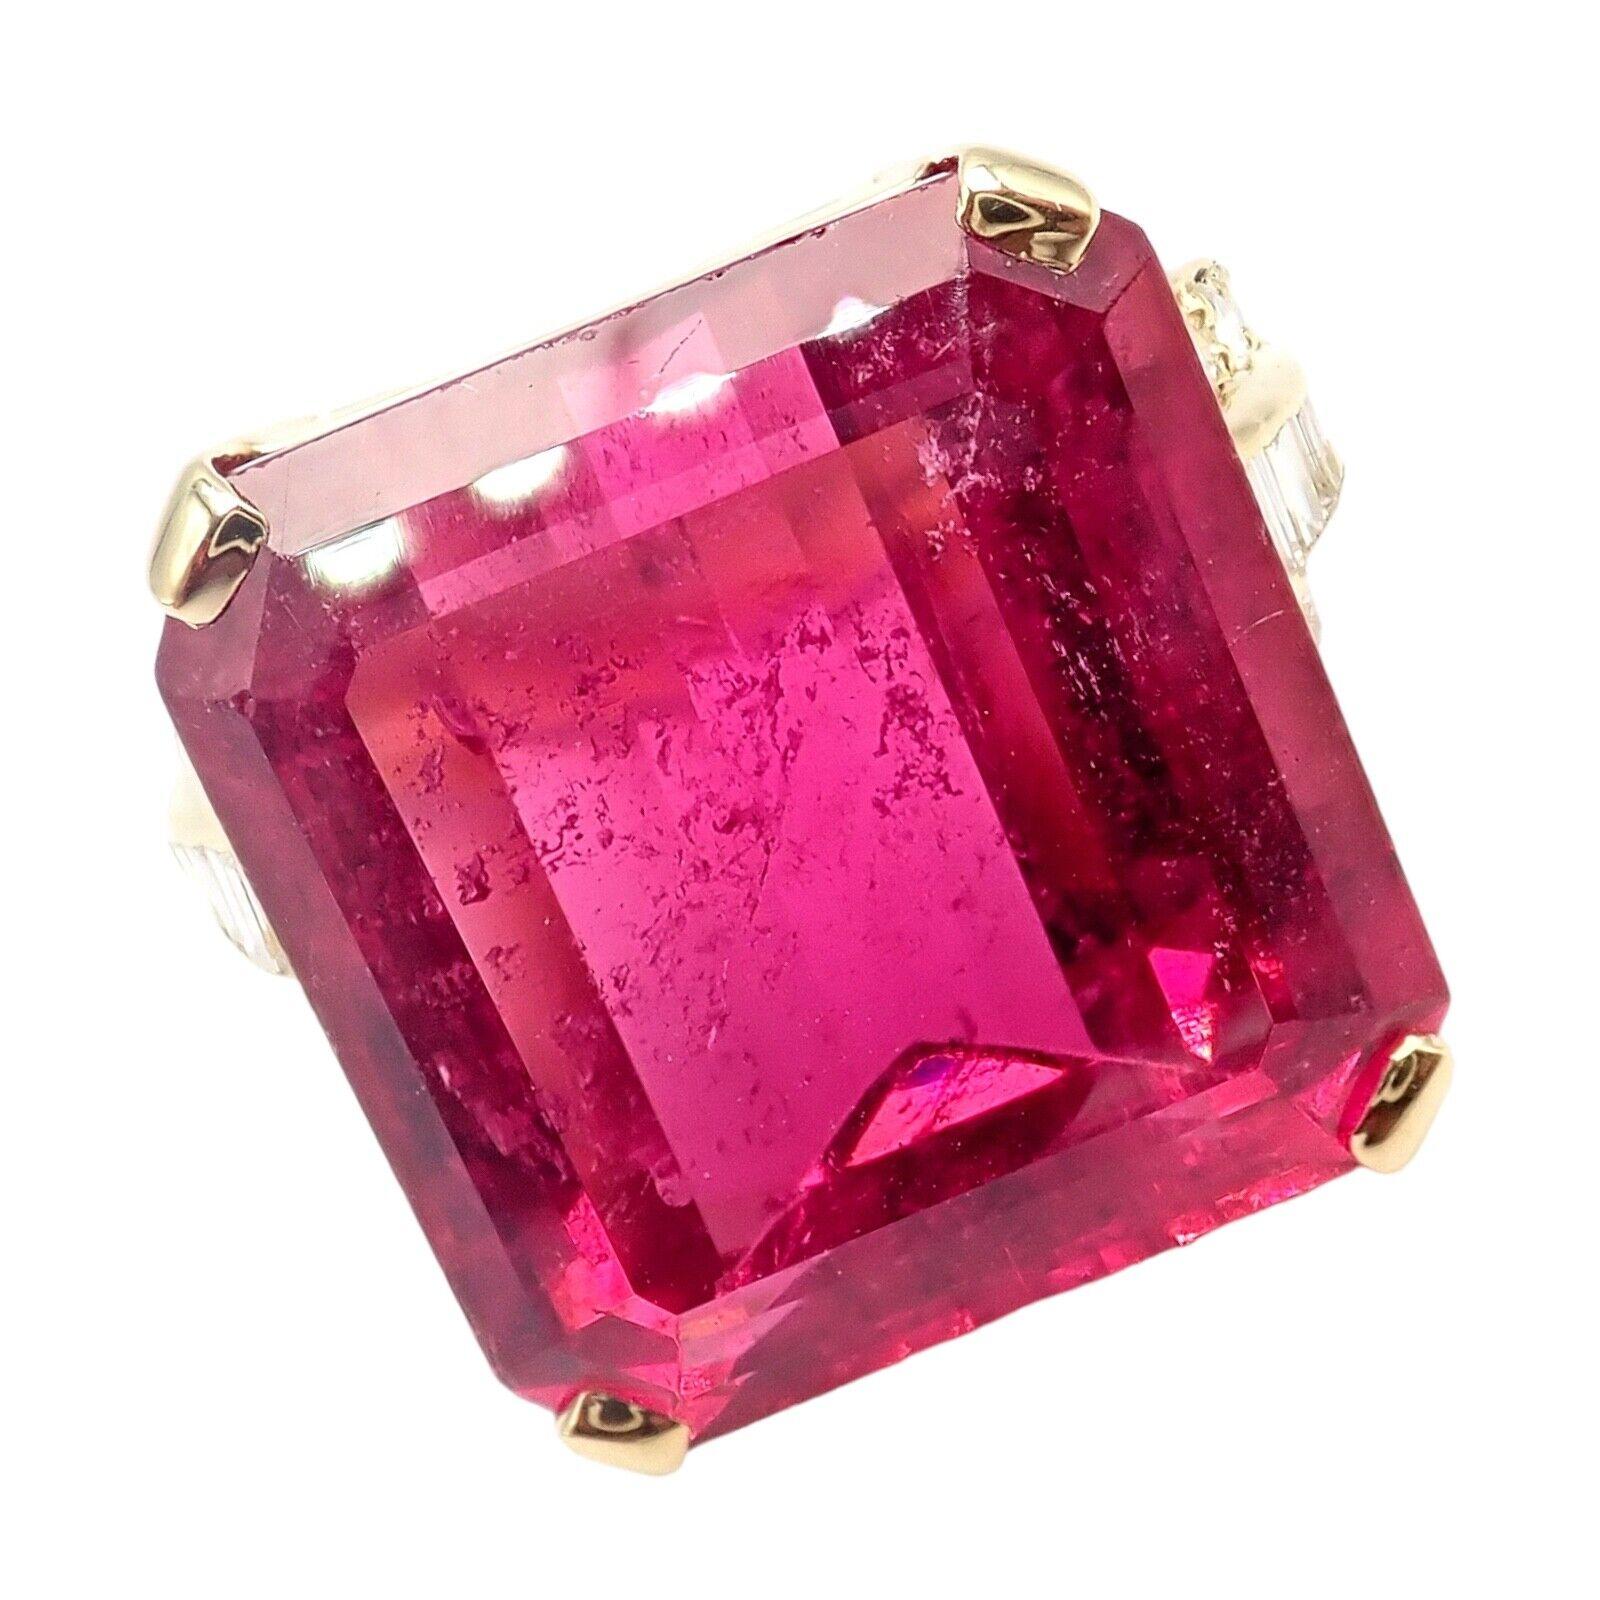 18k Yellow Gold Diamond Pink Tourmaline Statement Ring by H. Stern. 
The Authentic H. Stern 18k Yellow Gold Diamond Large Pink Tourmaline Statement Ring is a breathtaking piece of jewelry. Made from genuine 18k yellow gold, this ring features a